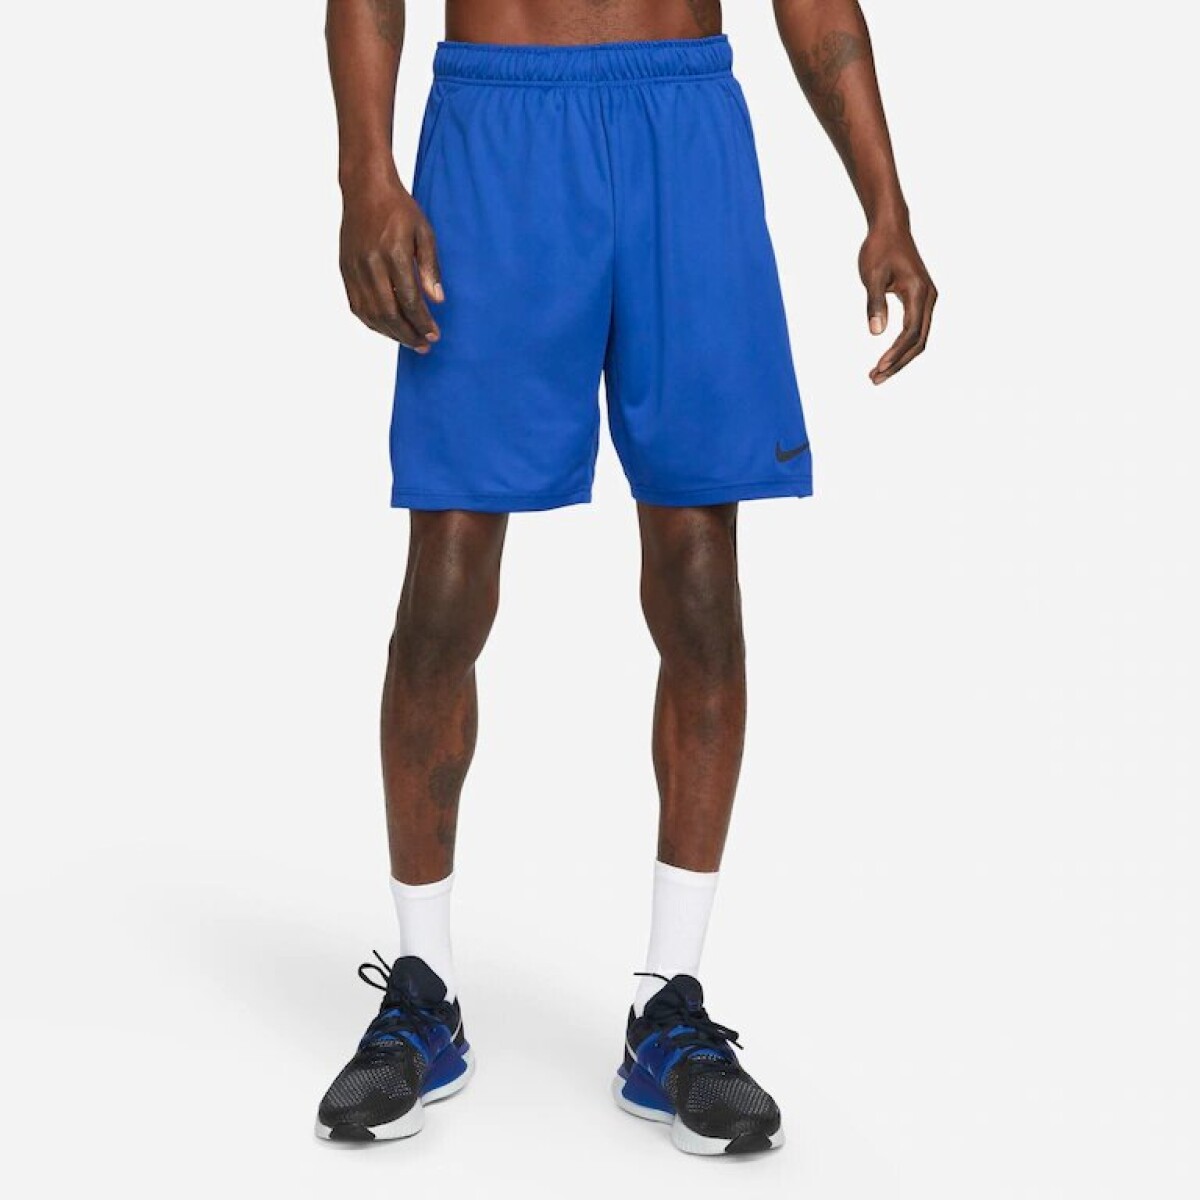 Short Nike Dri-fit Epic Knit 8in - Short Nike Epic Knit 8in Game 